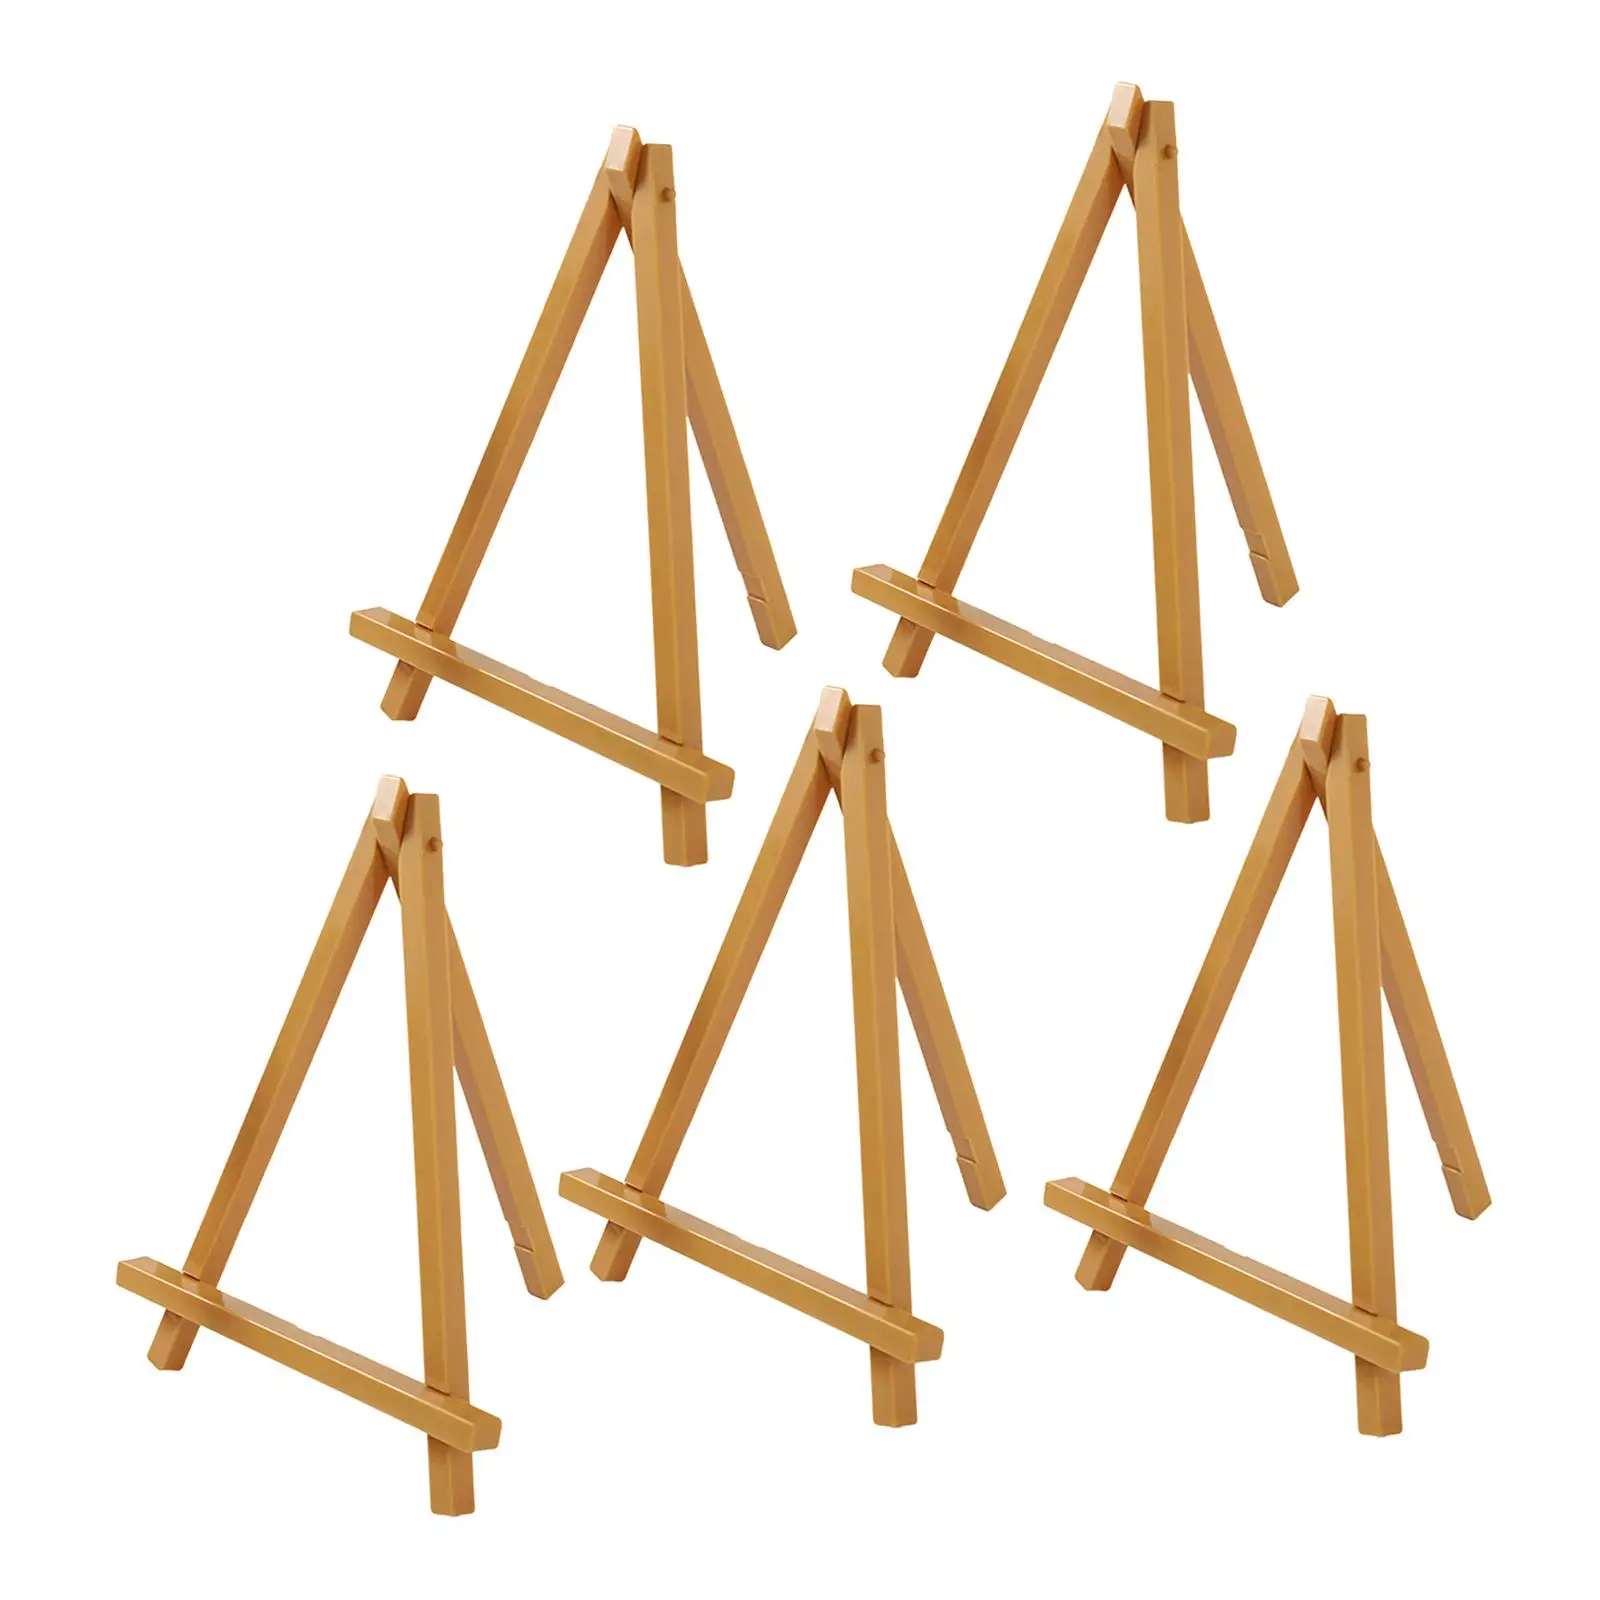 5 Pieces Wooden Mini Easel Frame Party Painting Easel Lightweight Signs Art Boards Home Birthday Portable Folding Displaying Art